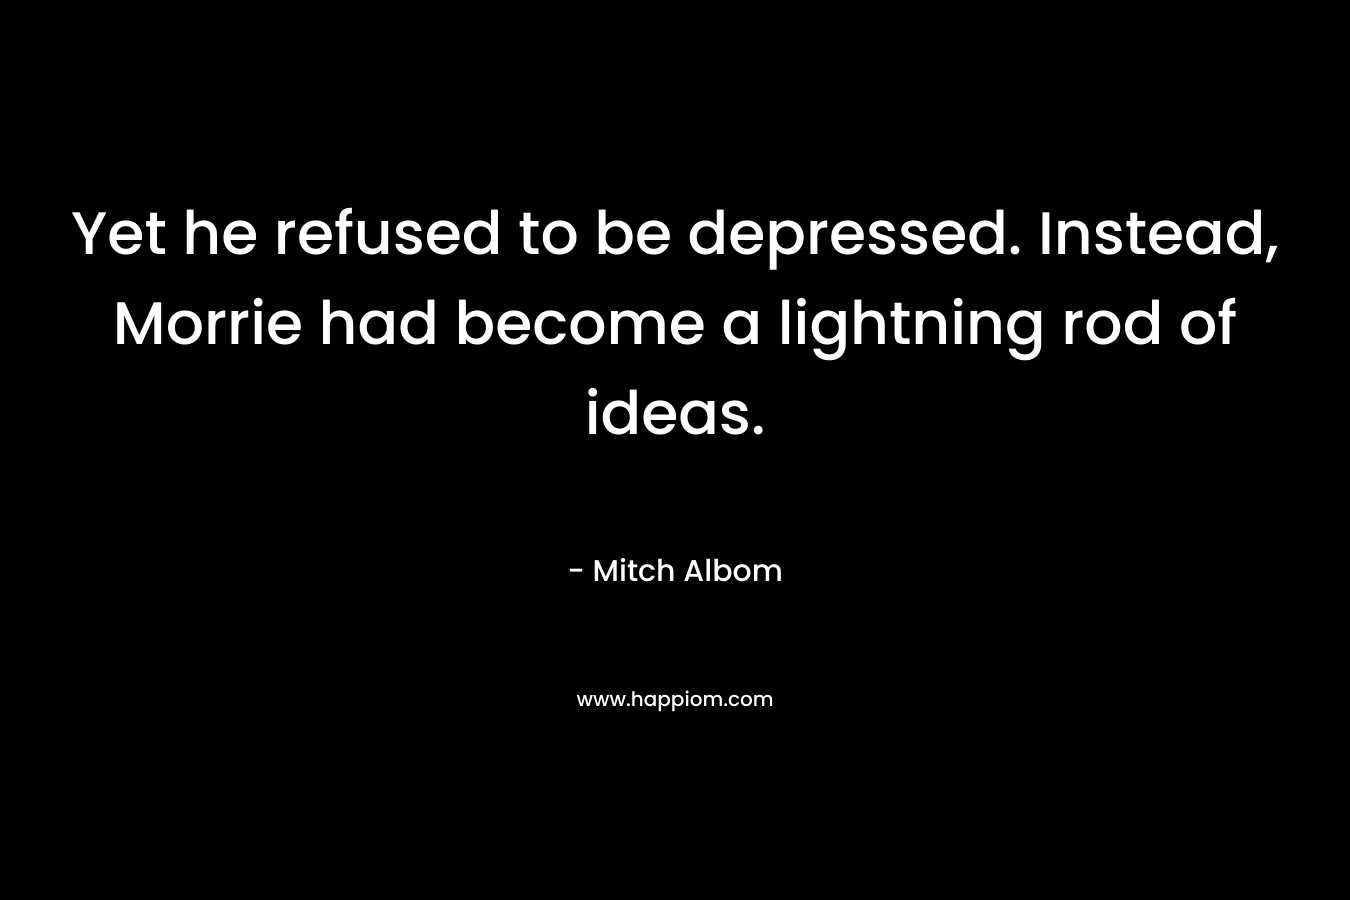 Yet he refused to be depressed. Instead, Morrie had become a lightning rod of ideas.